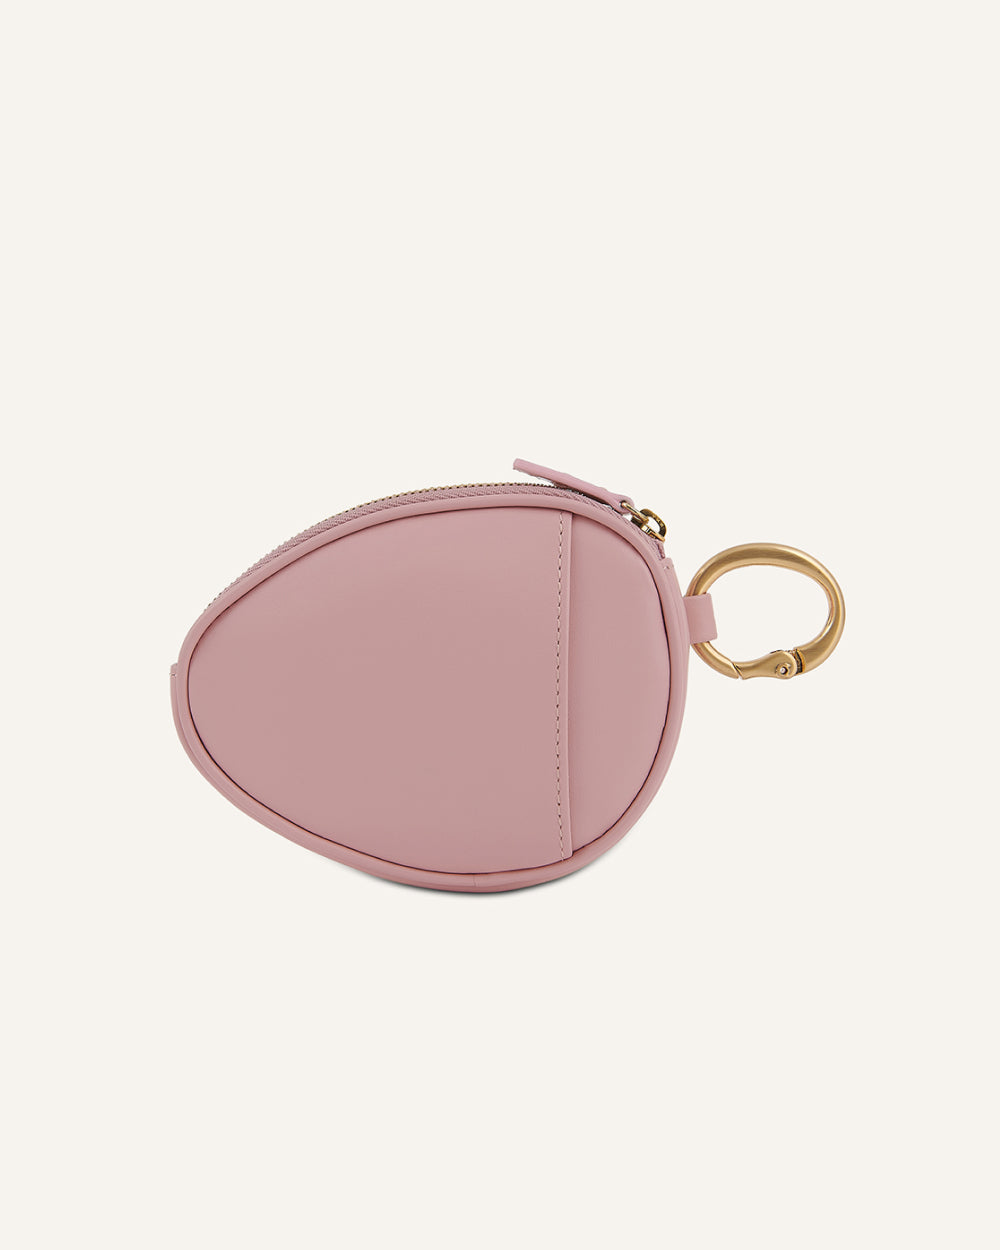 Oval Coin Purse Pink